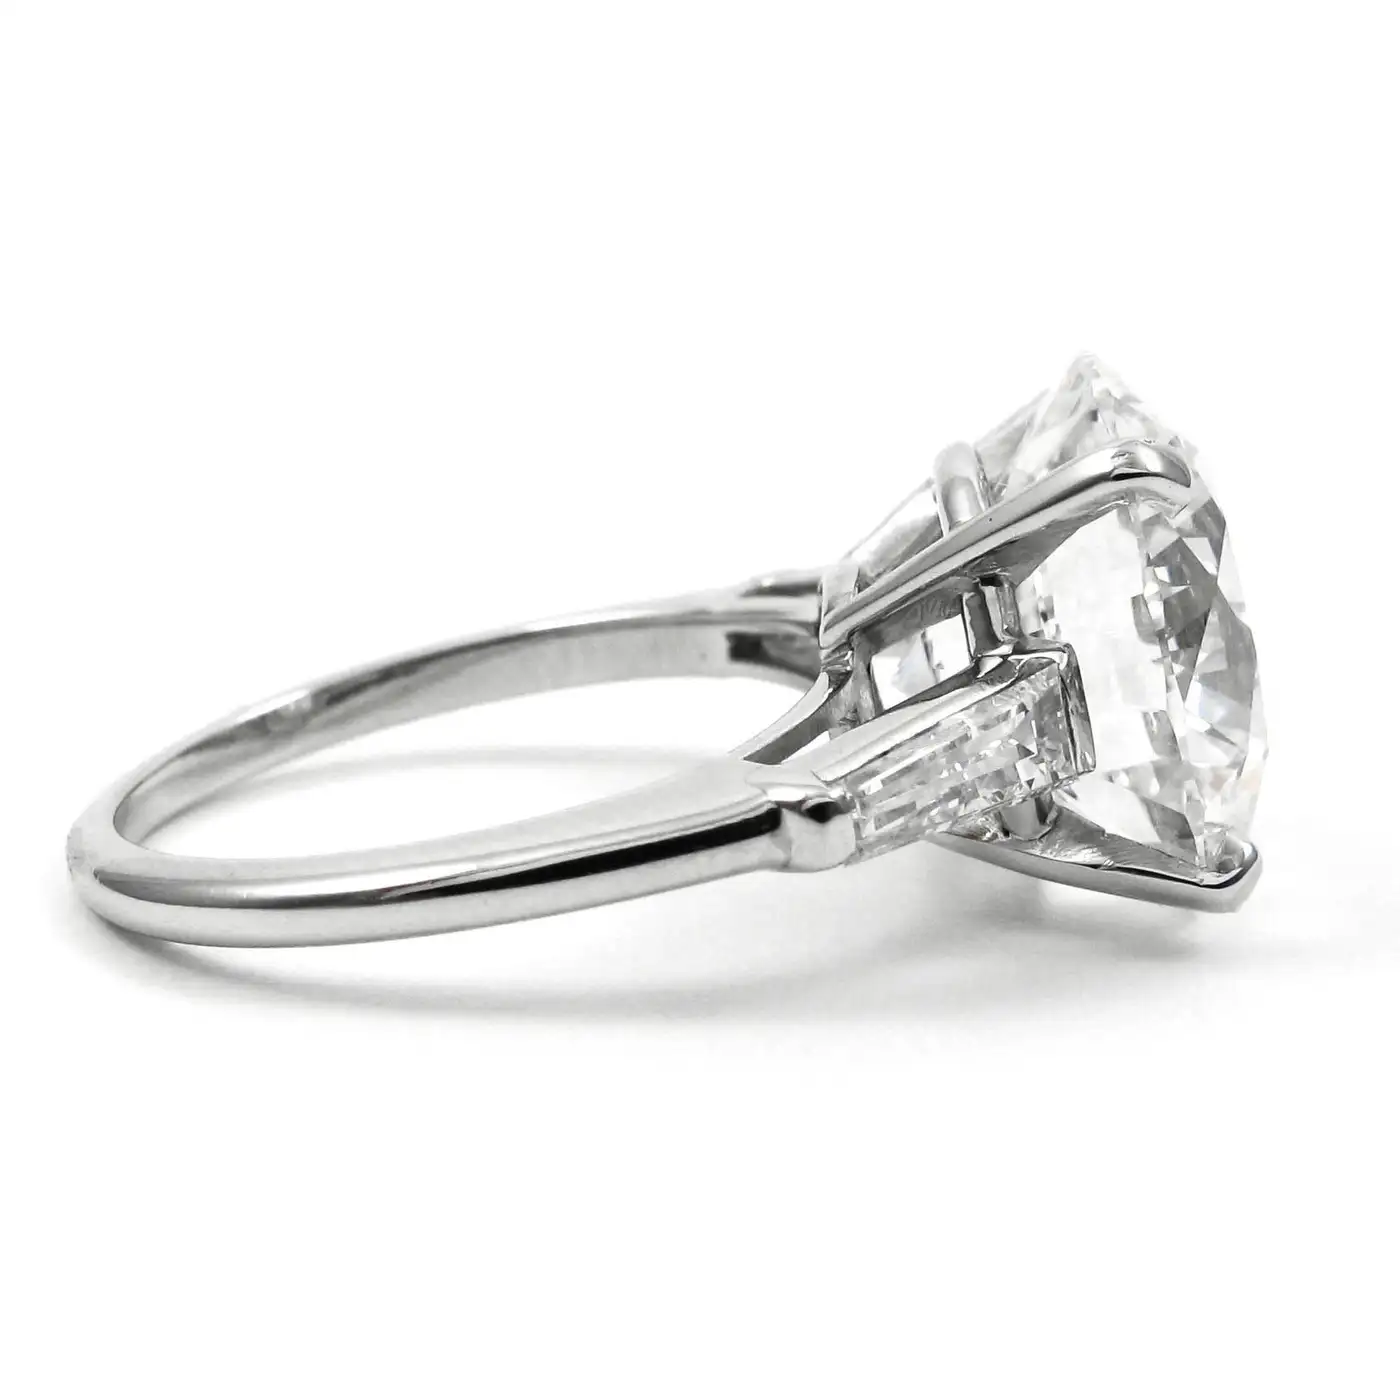 J.-Birnbach-7.33-ct-Round-Diamond-Engagement-Ring-with-Petite-Tapered-Baguettes-5.webp